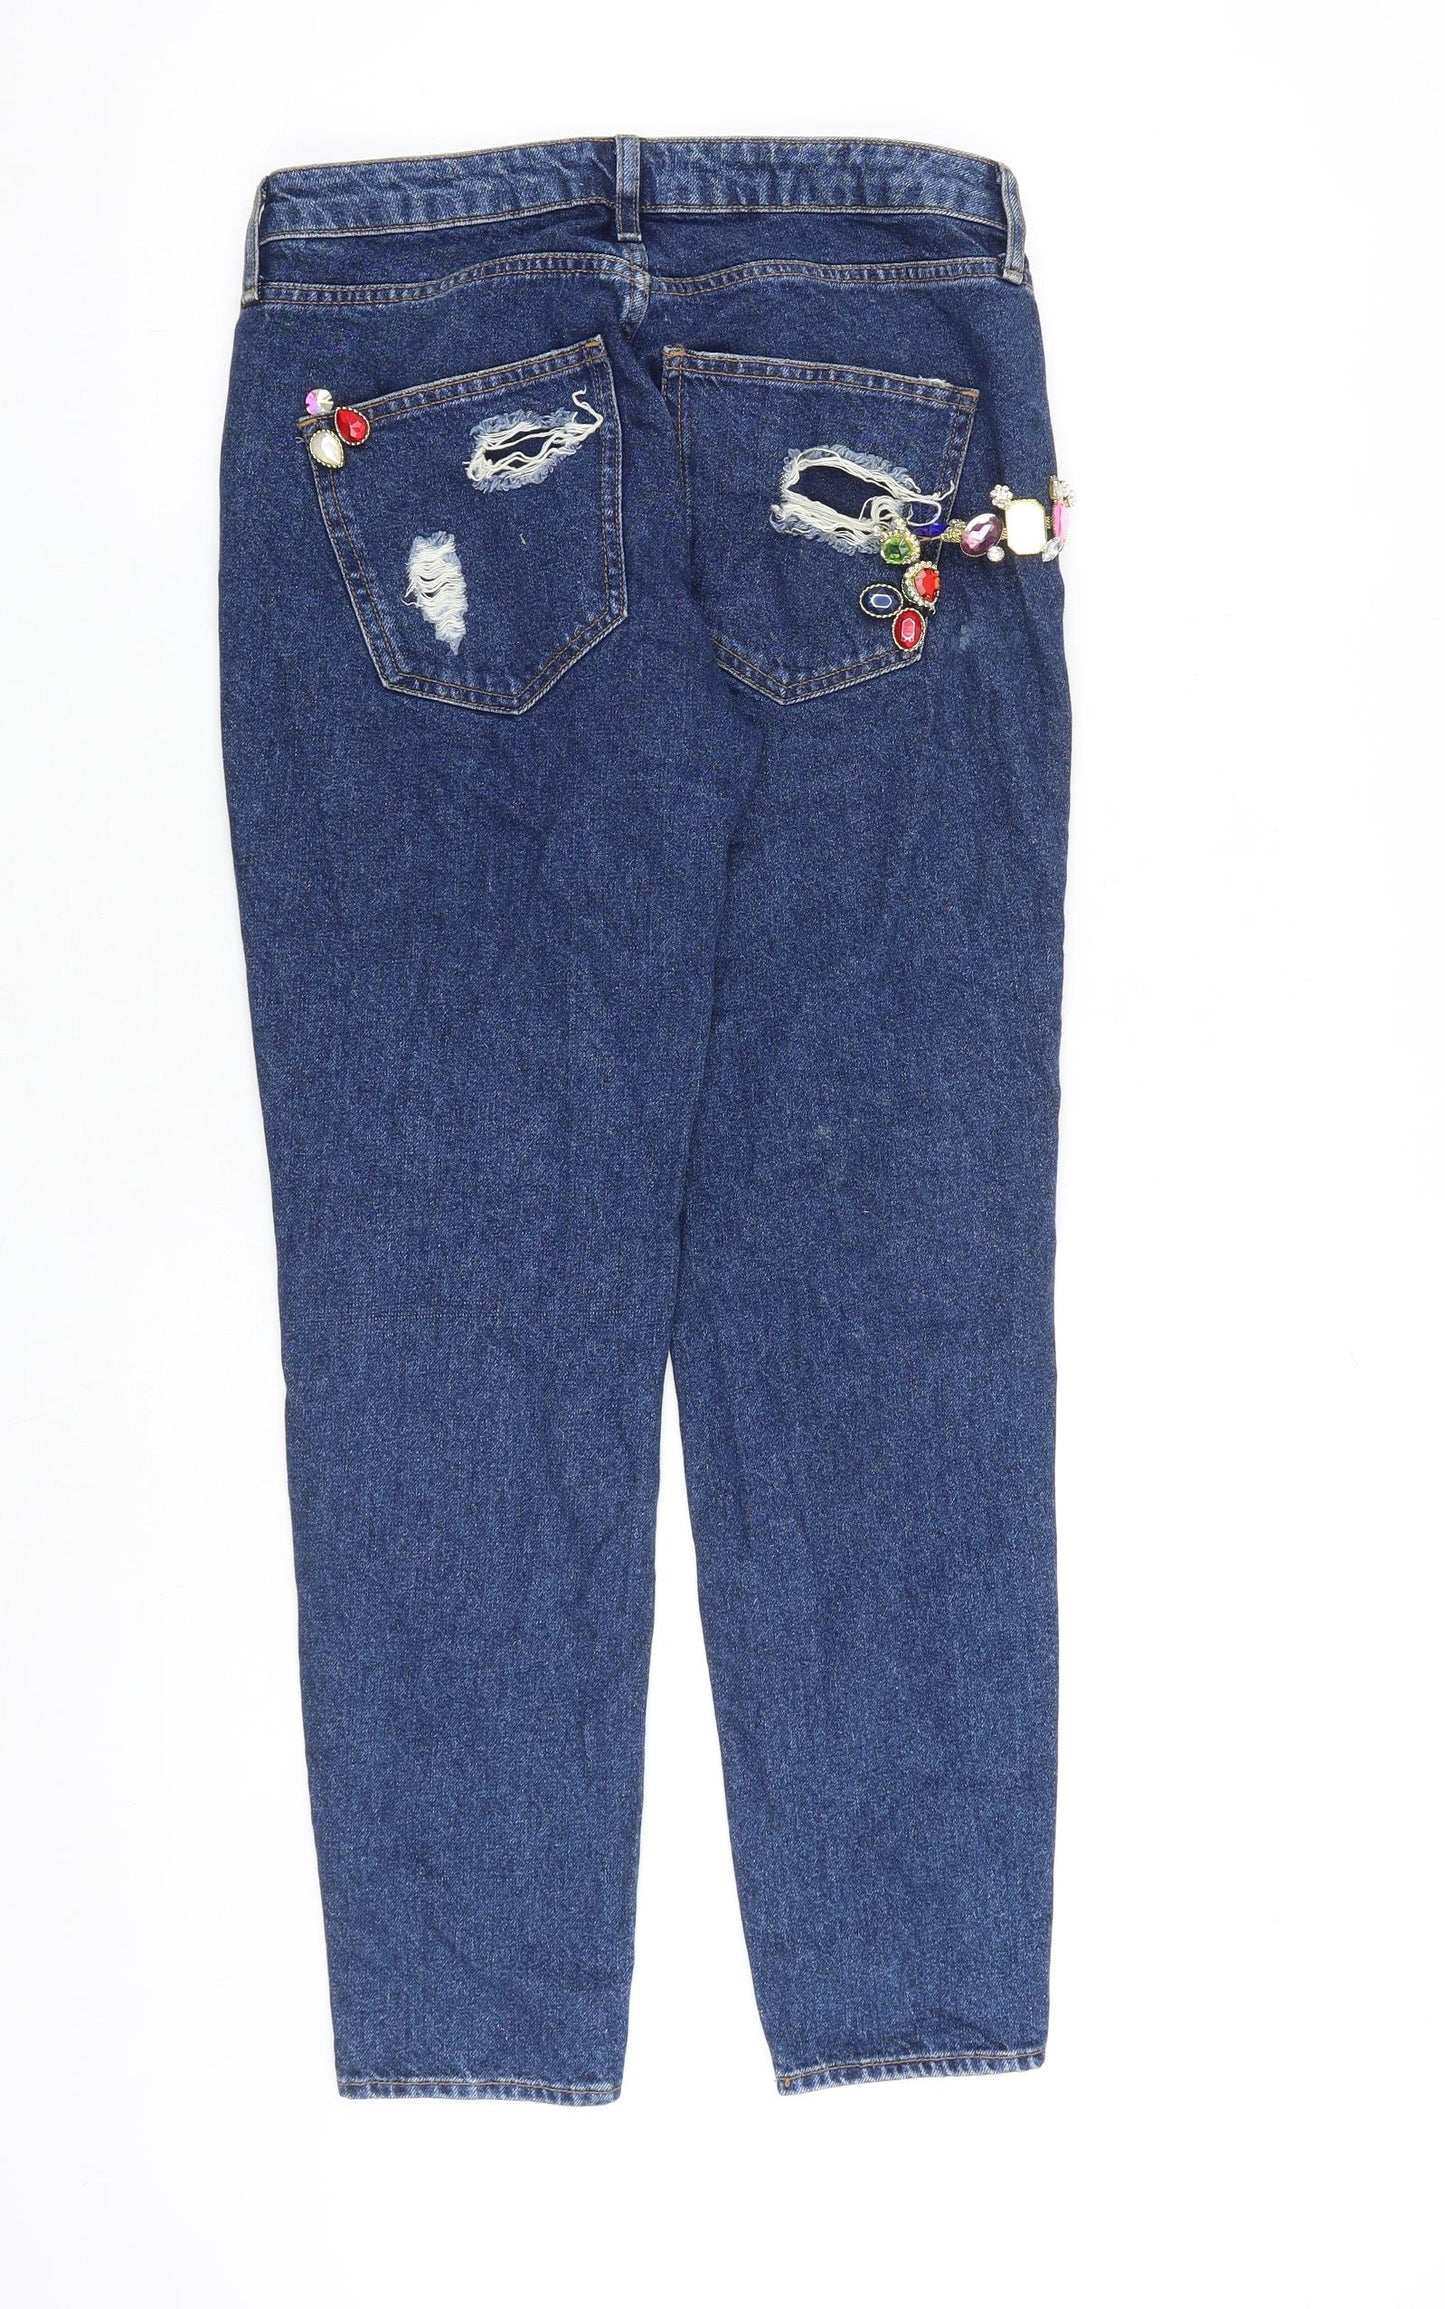 River Island Womens Blue Cotton Tapered Jeans Size 8 L28 in Regular Zip - Embellished